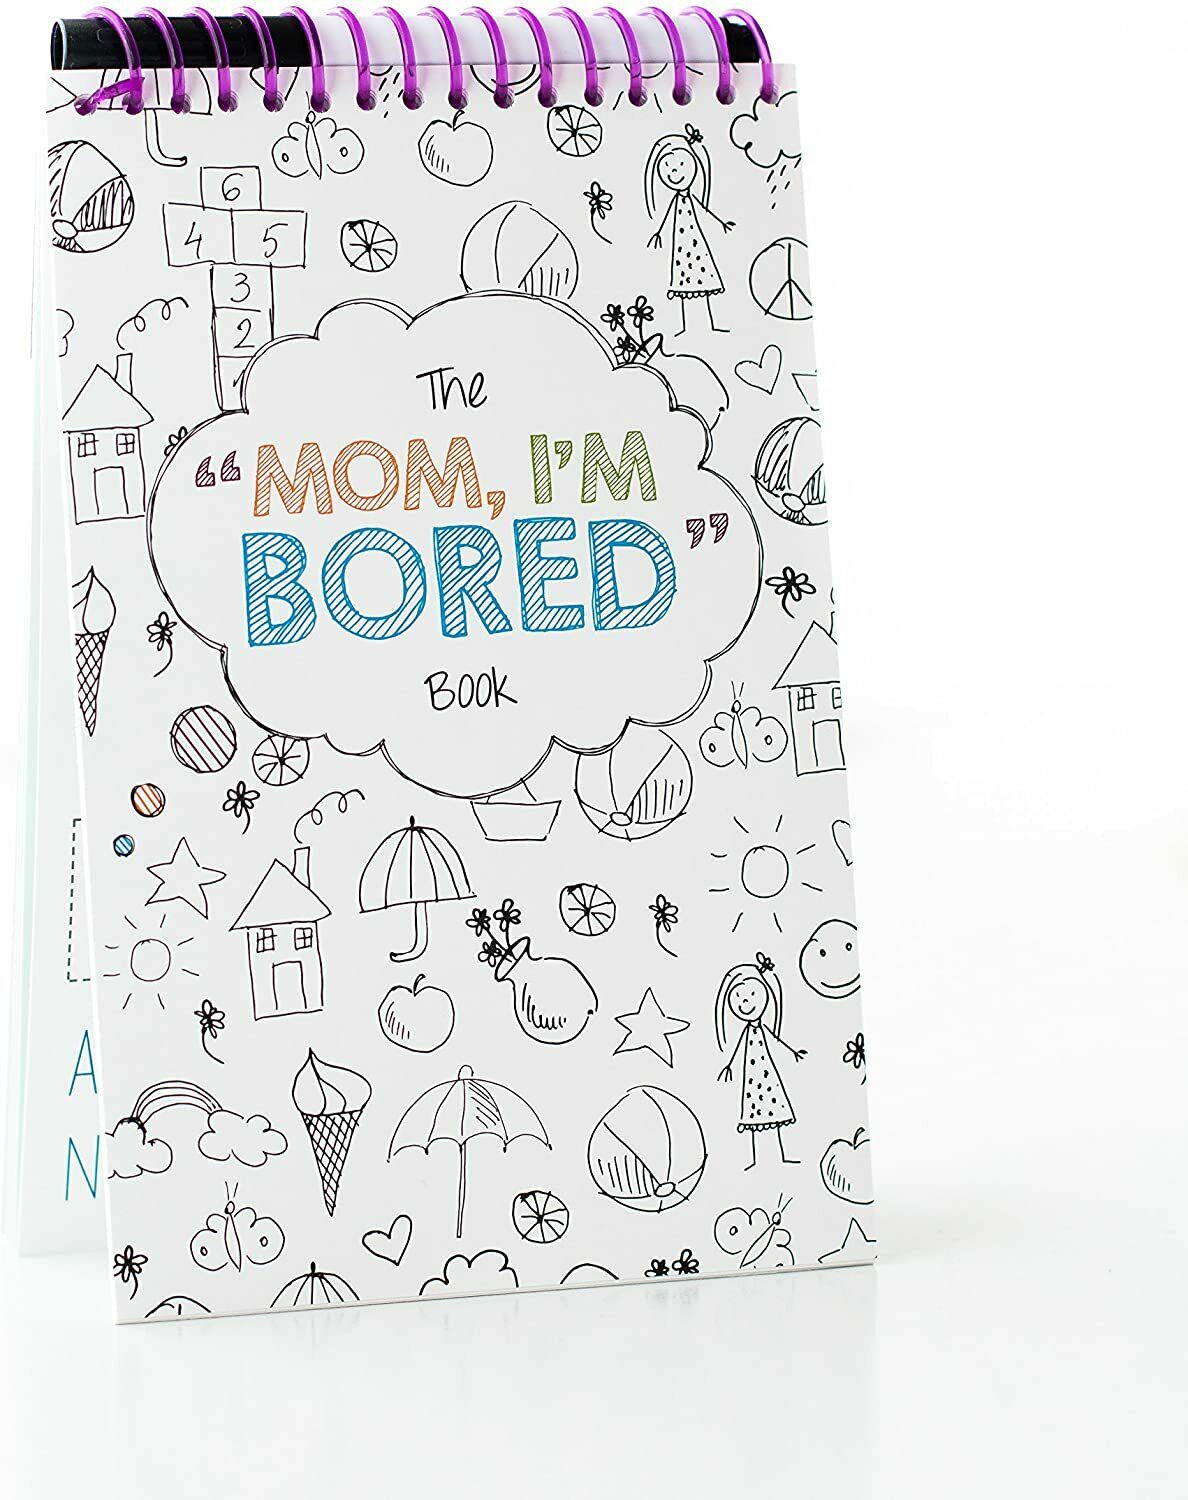 Mom, I'm Bored Children's Activity Book - Fun For Kids Ages 3 Years Old And Up